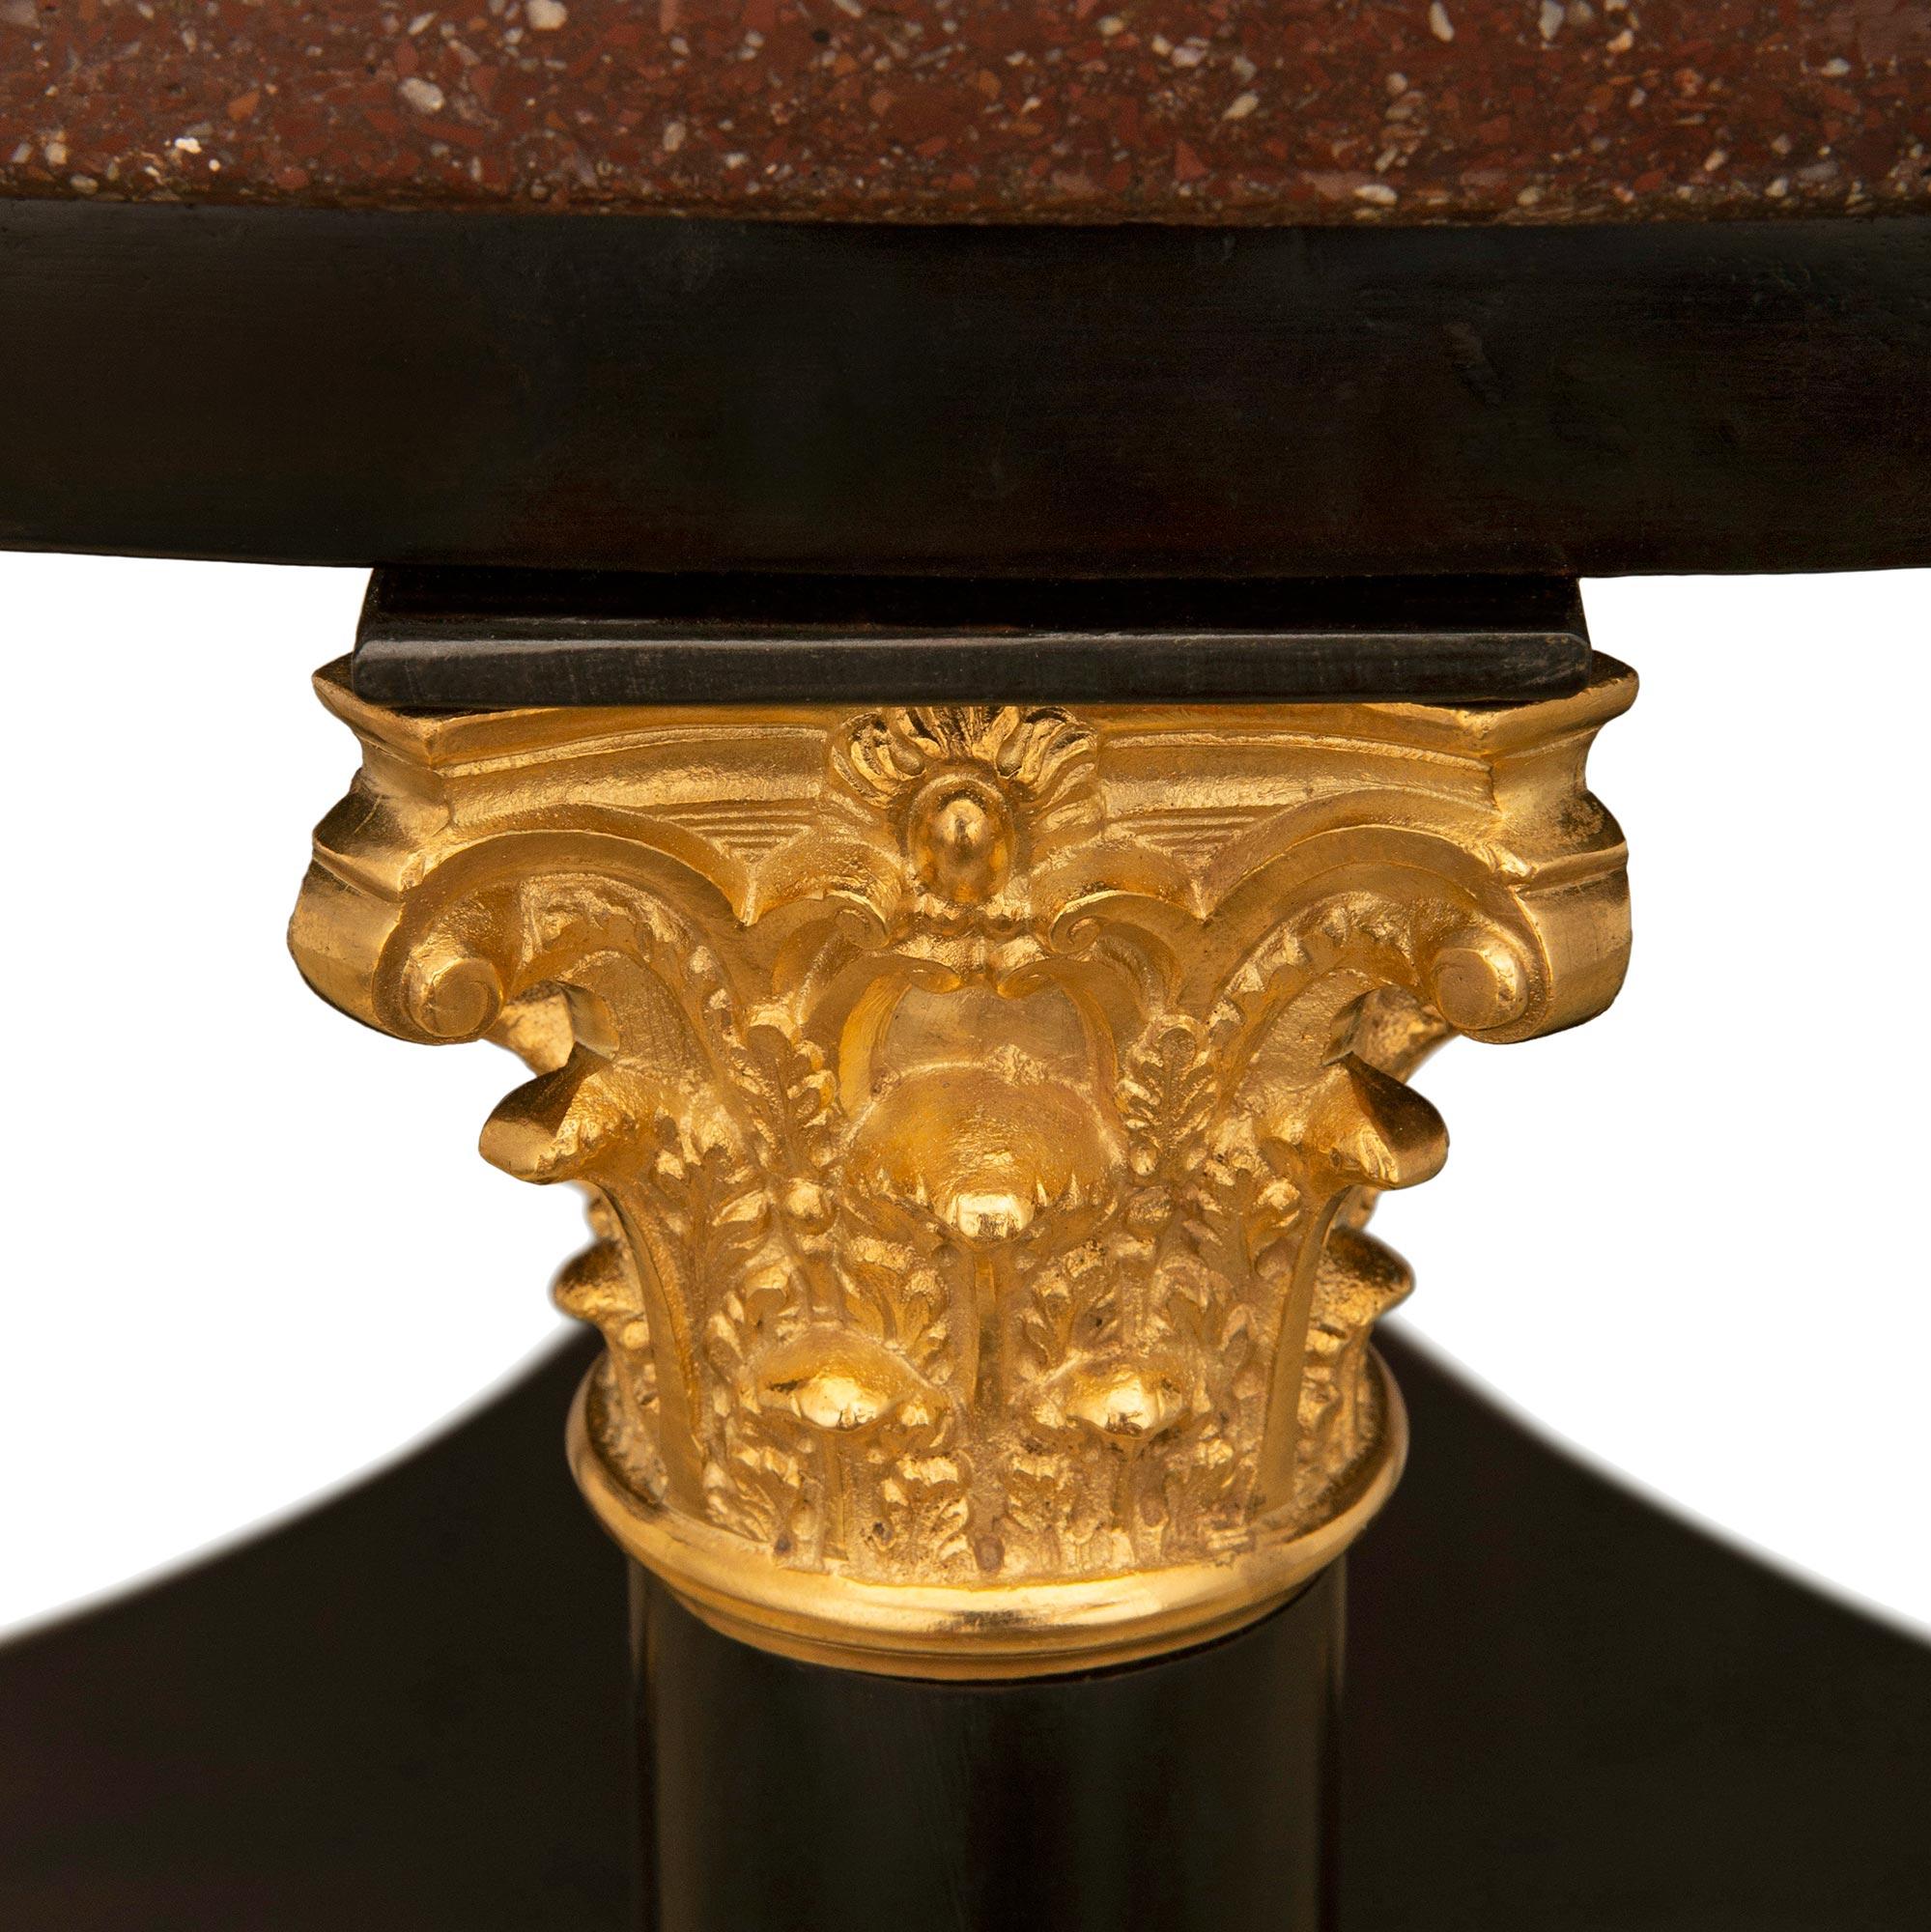 Ebonized 19th Century Neoclassical Style Mahogany, Ormolu and Porphyry Coffee Table For Sale